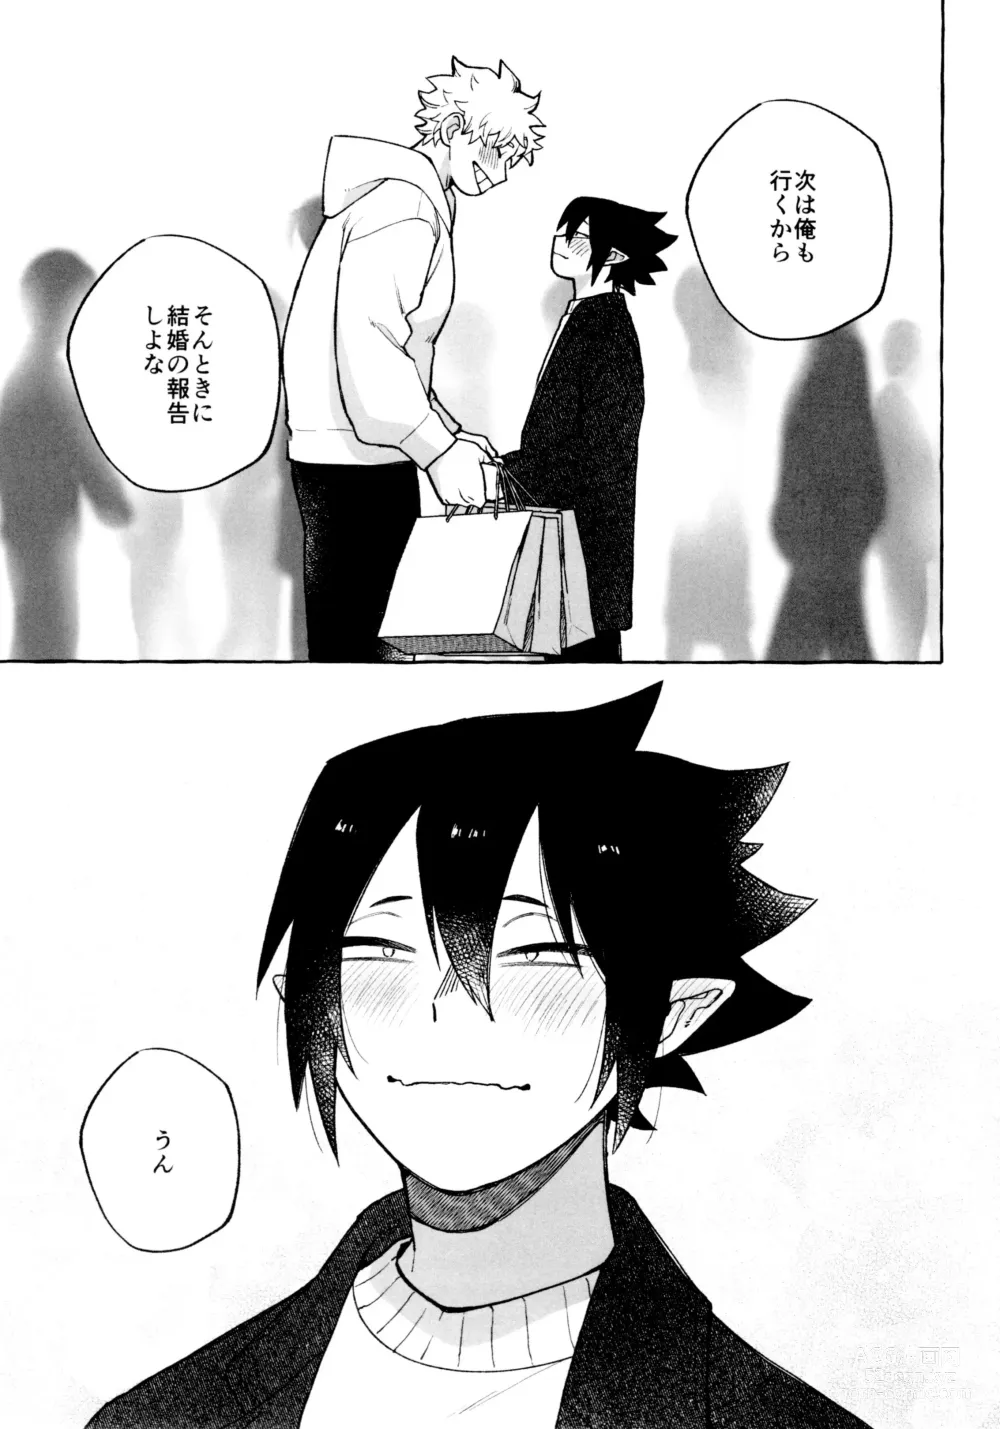 Page 35 of doujinshi Please please